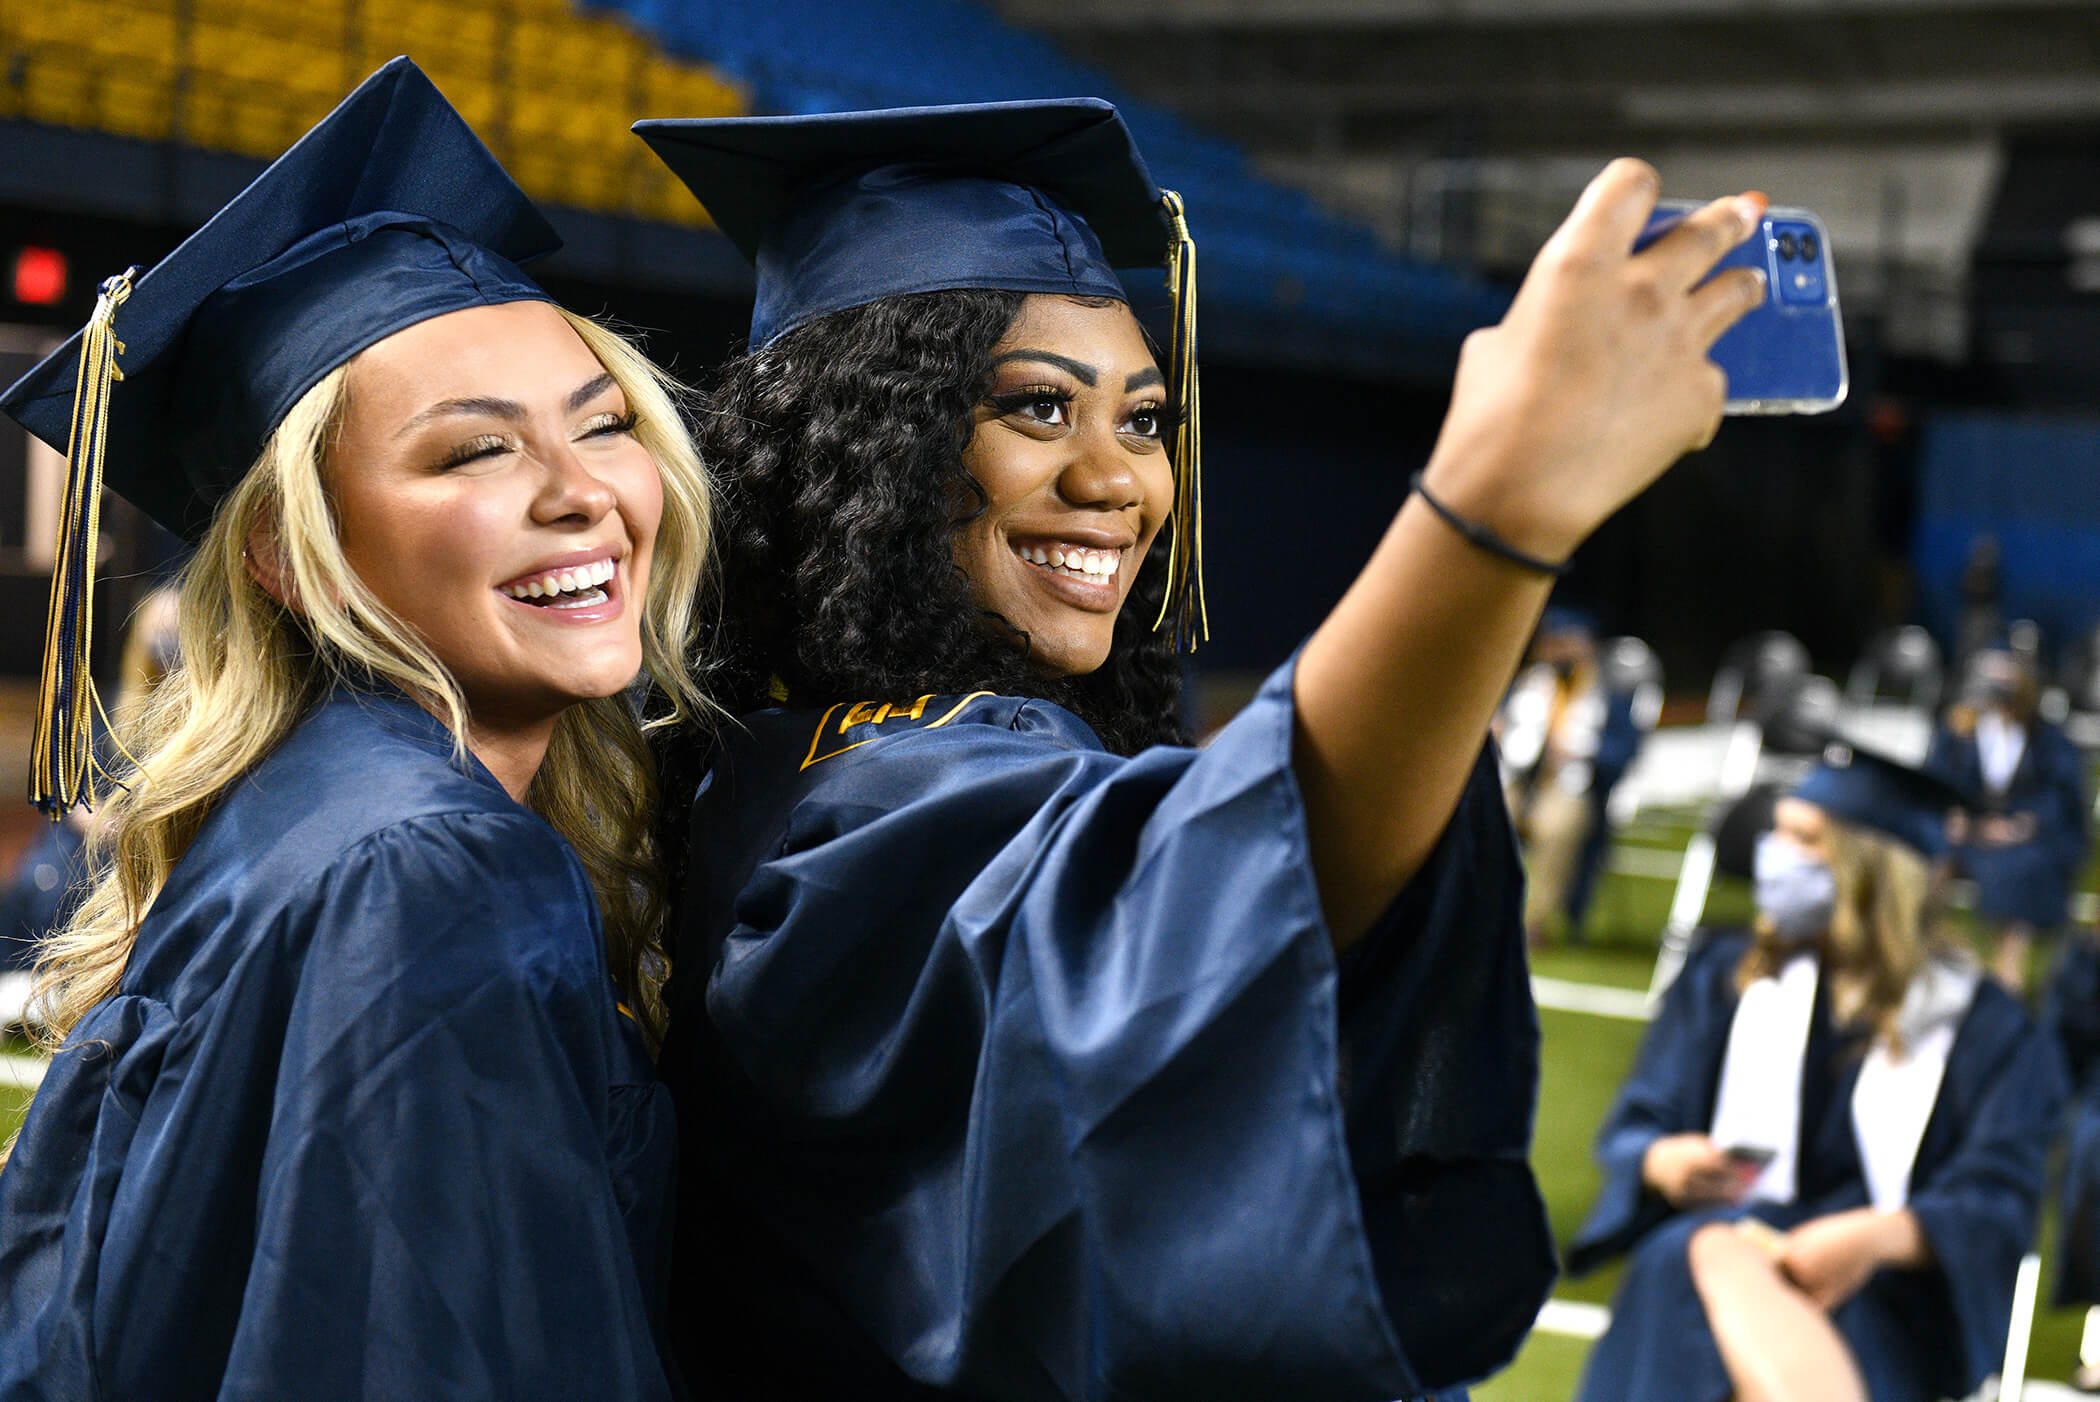 Two women take a smiling selfie at graduation. They are in their cap and gowns.